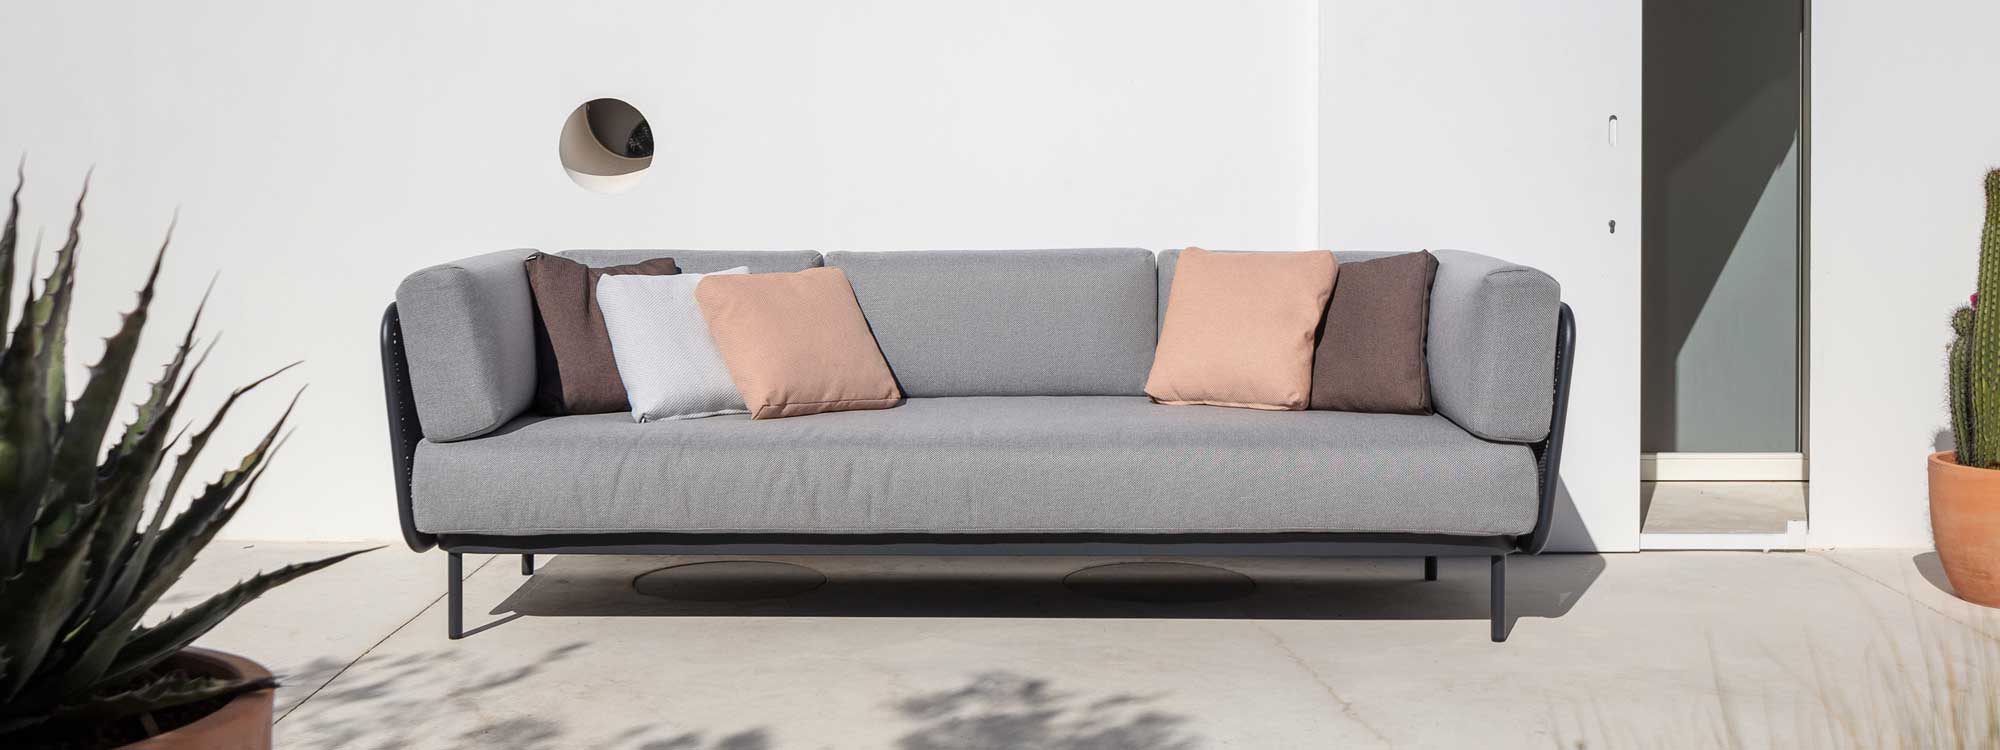 Image of anthracite Baza 3 seat garden sofa by Todus, shown against sunny white-washed wall